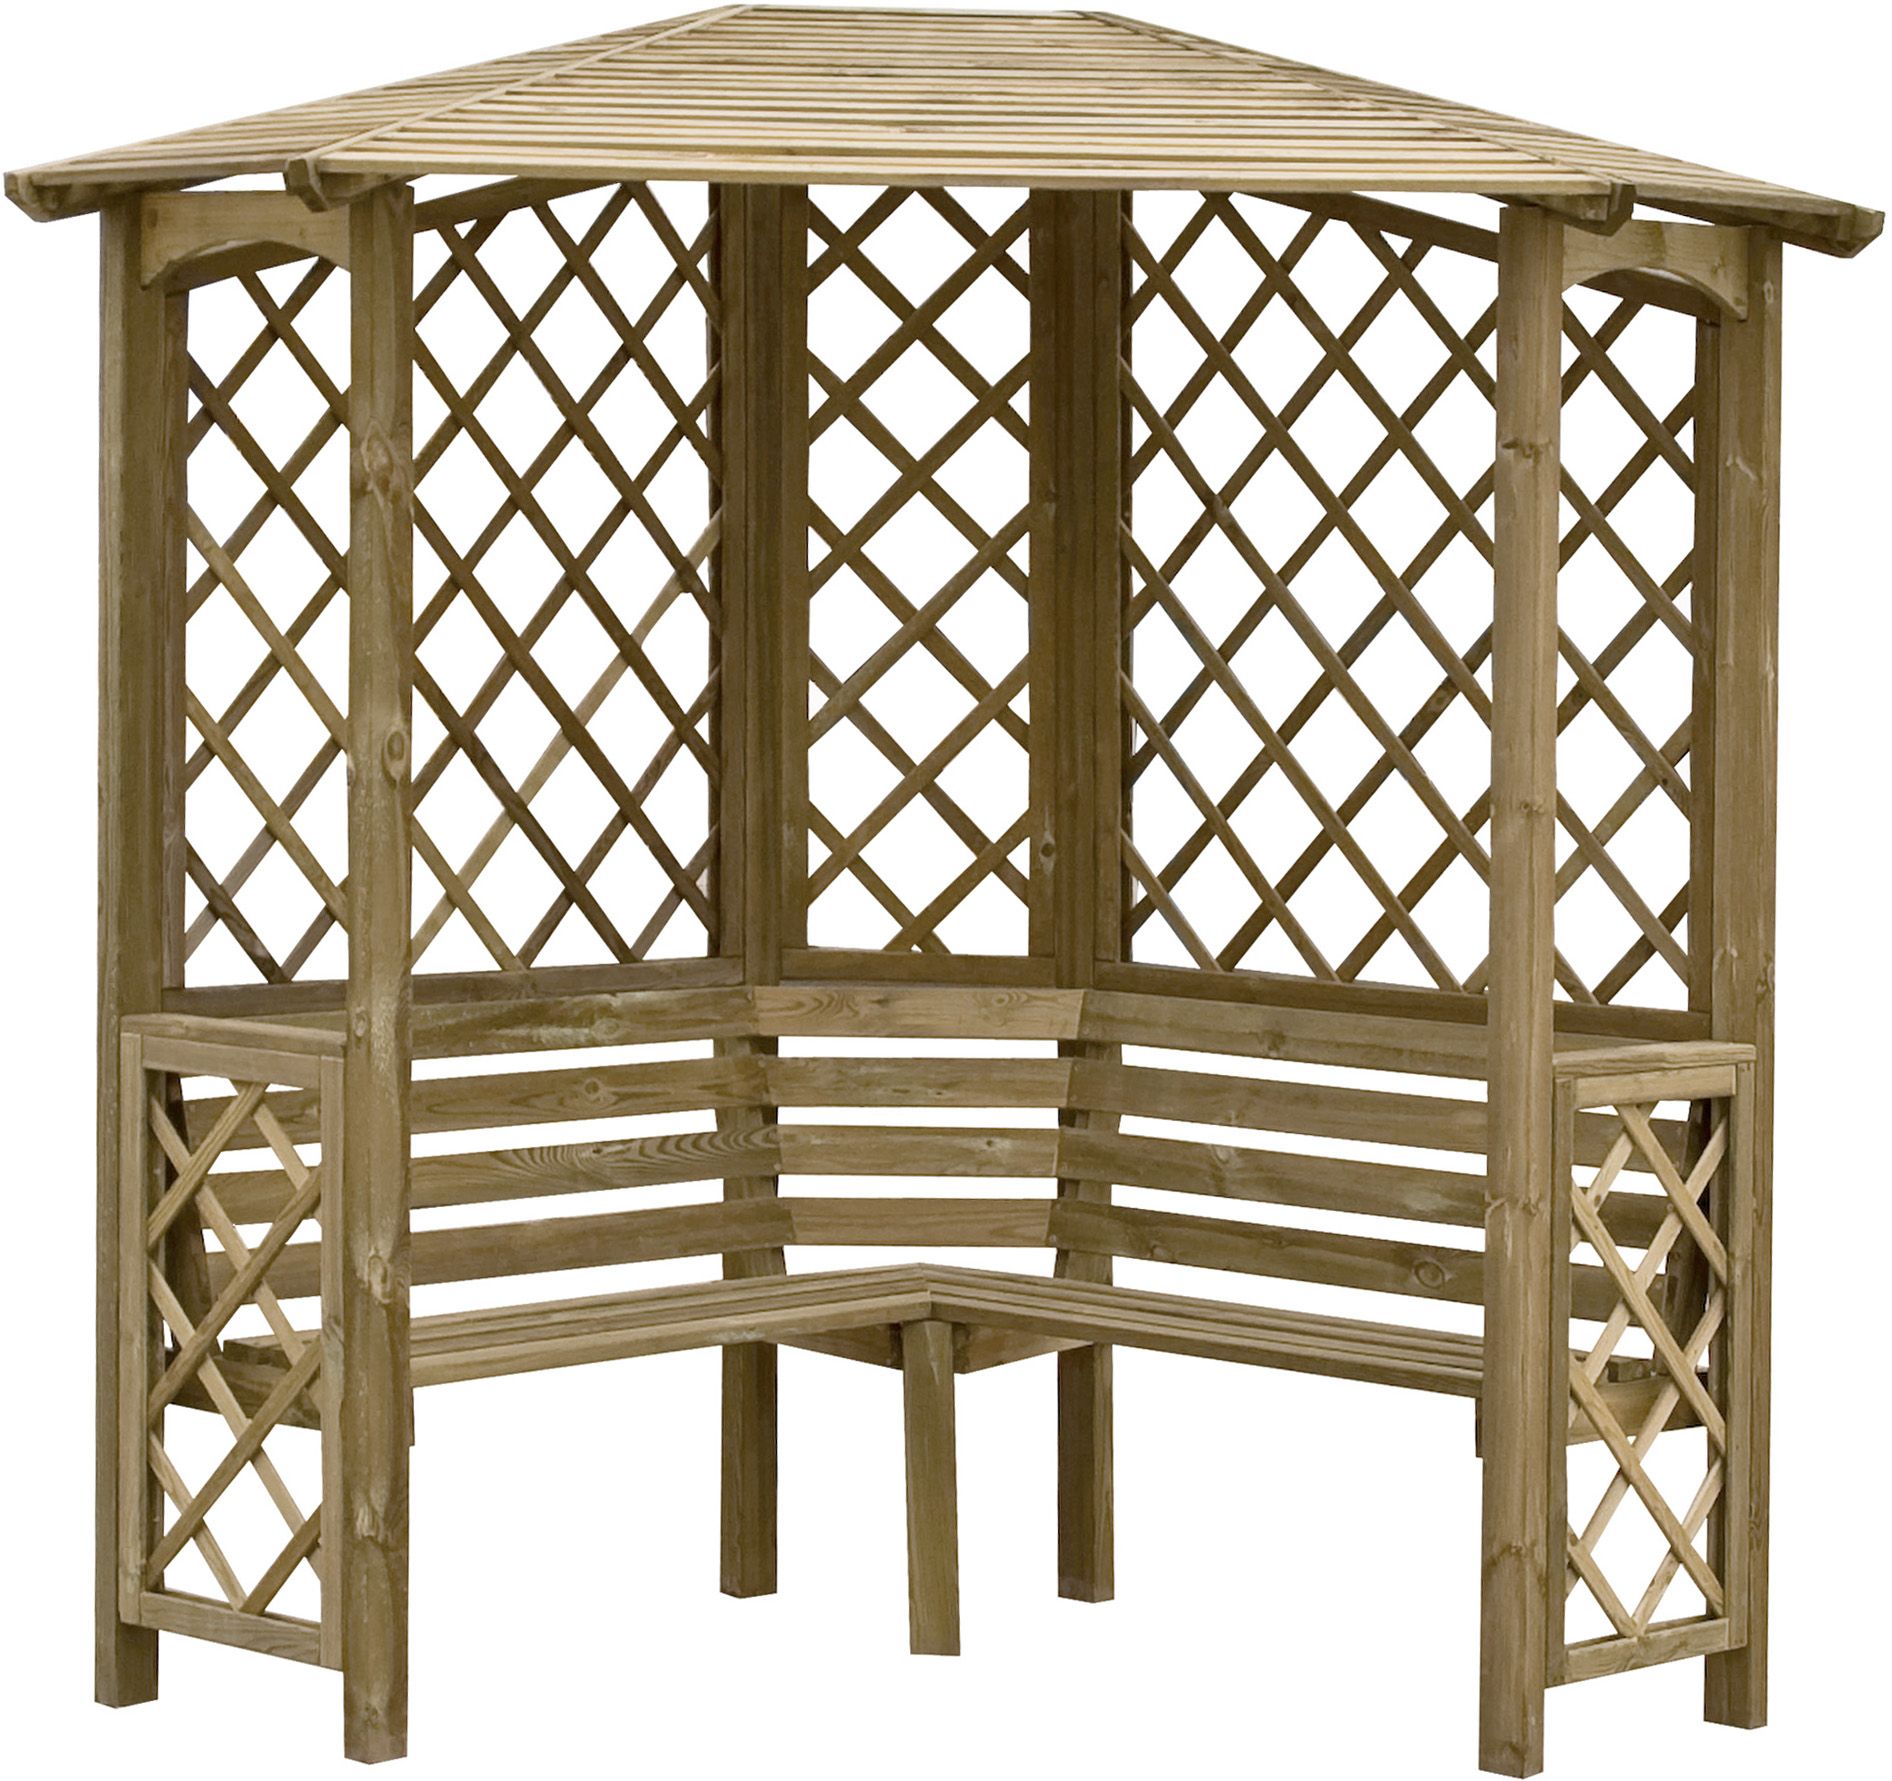 Blooma Chiltern Corner arbour, (H)2100mm (W)1580mm (D)1580mm - Assembly service included